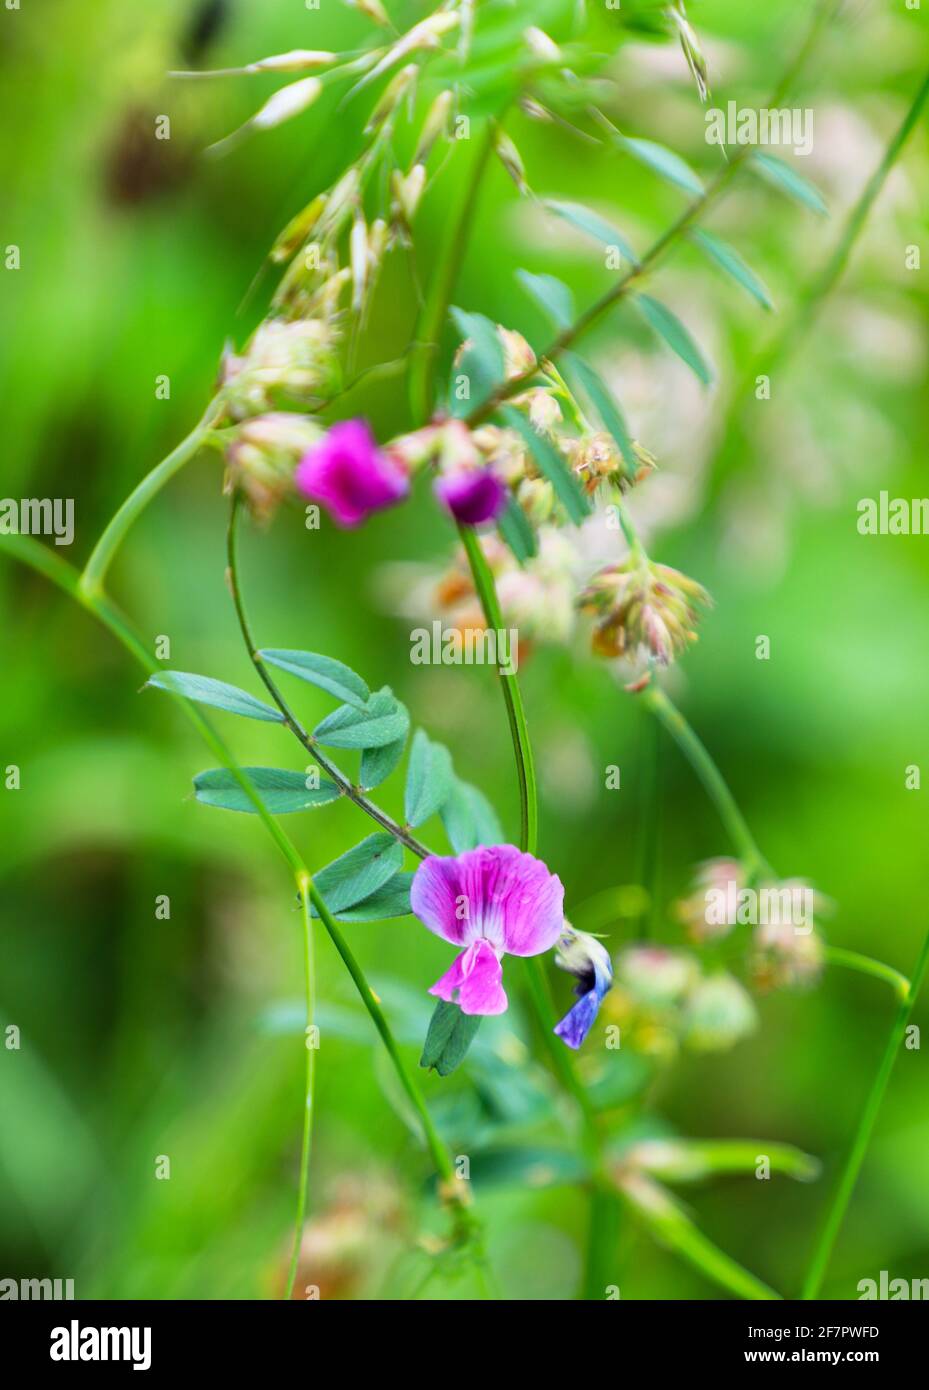 Purple flowers of Vicia sativa, known as the common vetch, garden vetch, tare or simply vetch, England, UK Stock Photo